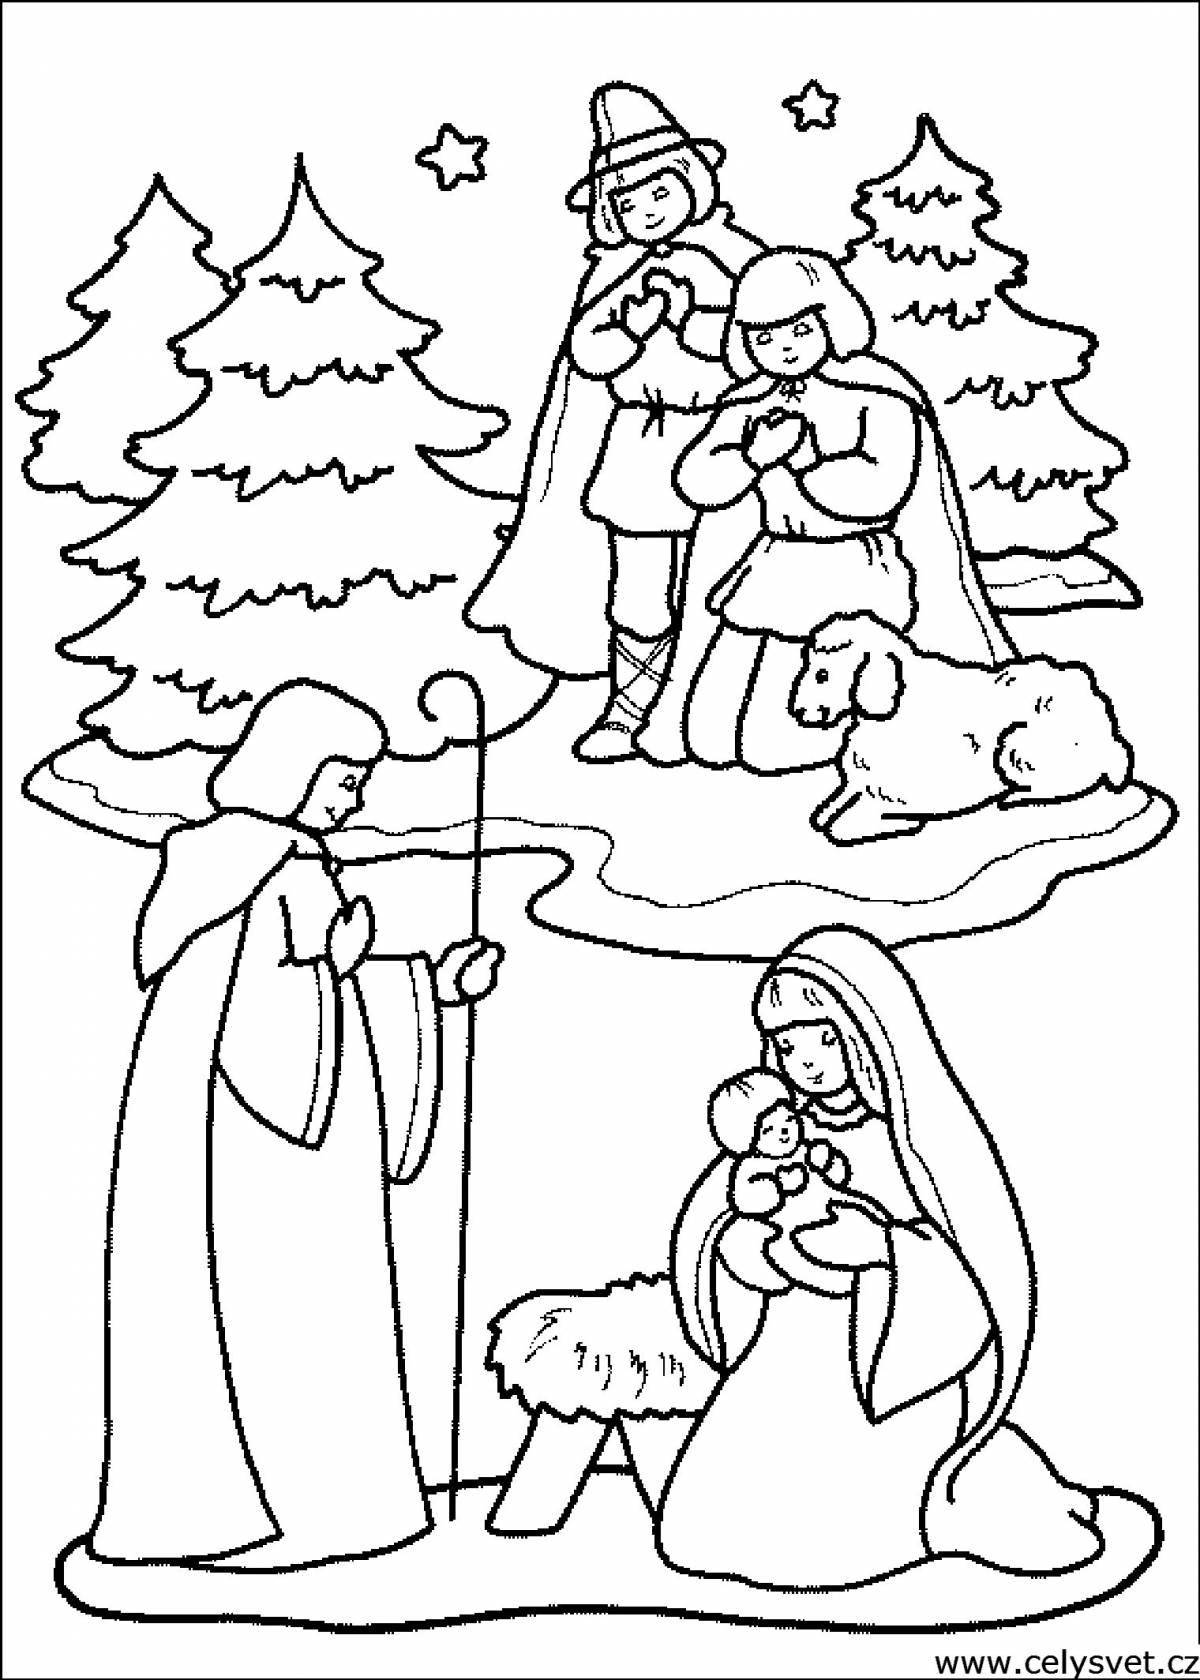 Christmas playful coloring book for 4-5 year olds